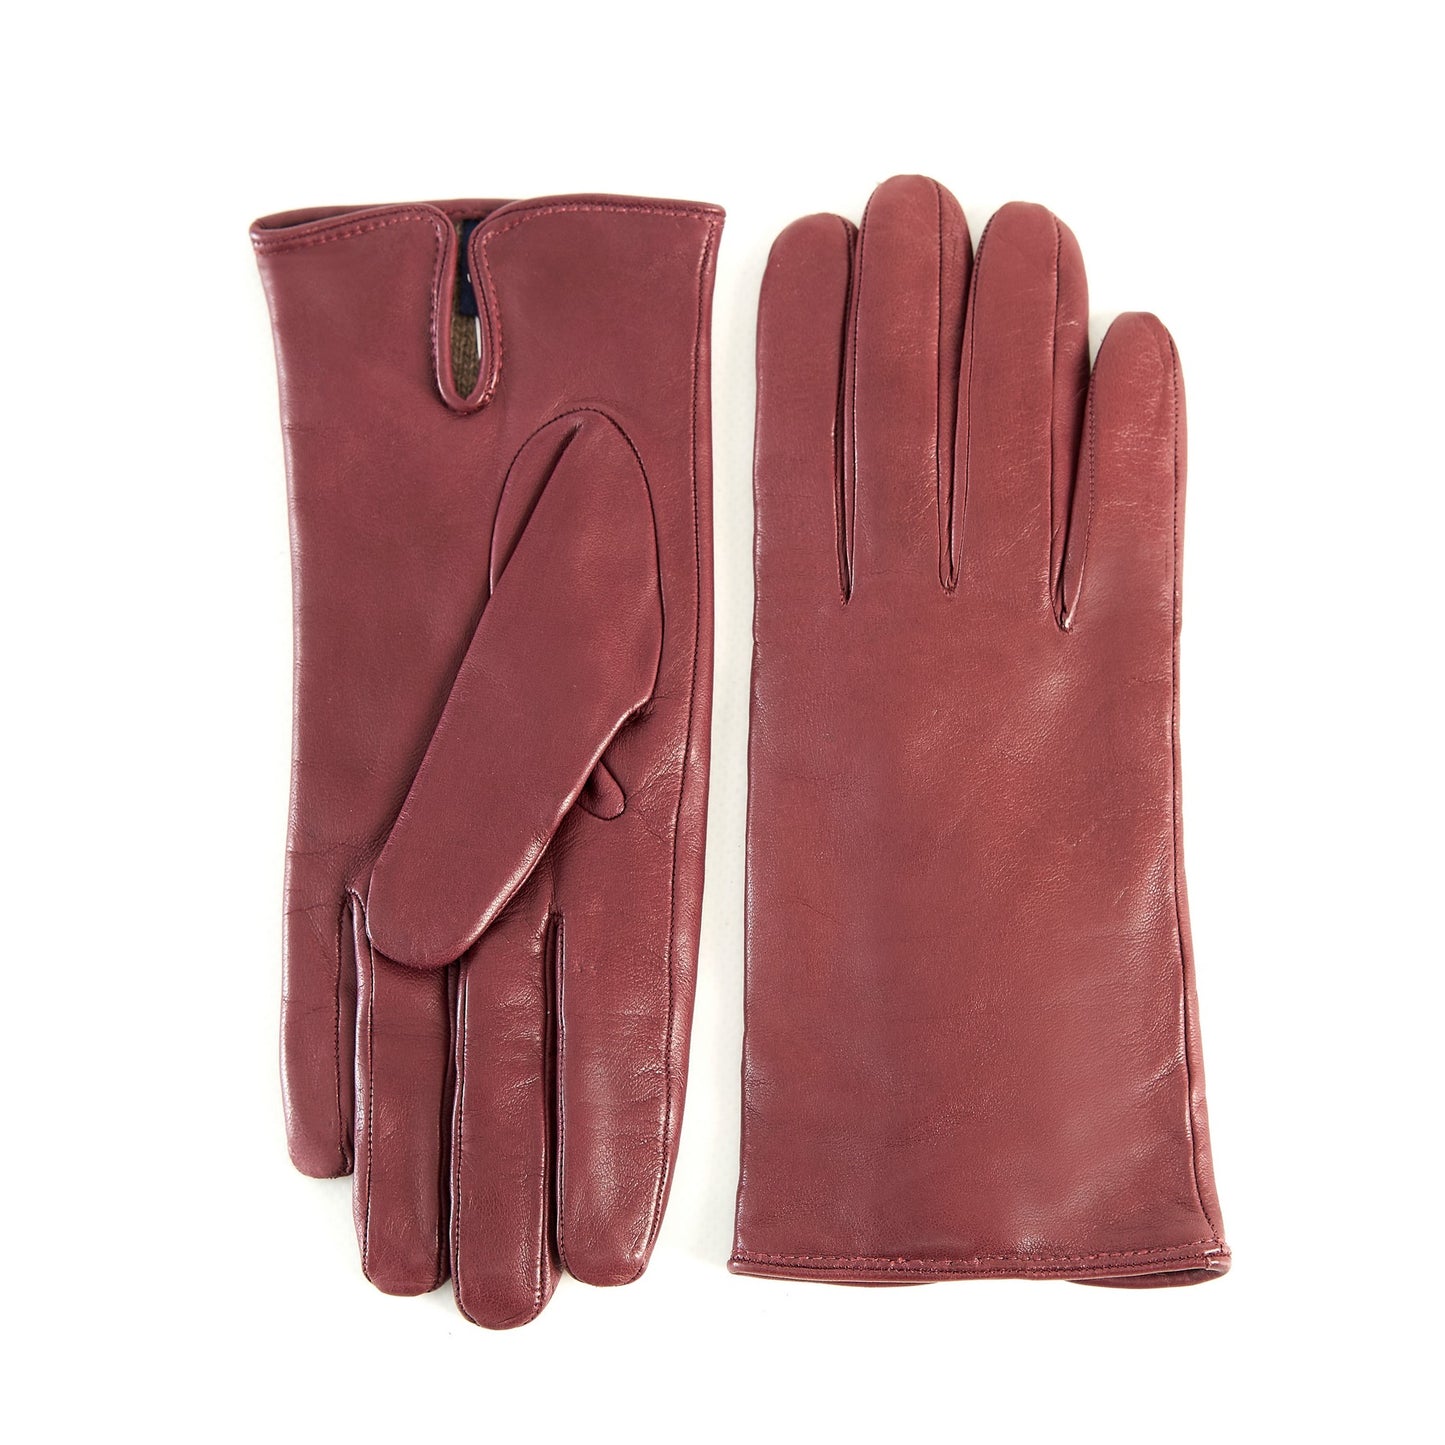 Women’s basic begonia soft nappa leather gloves with palm opening and mix cashmere lining